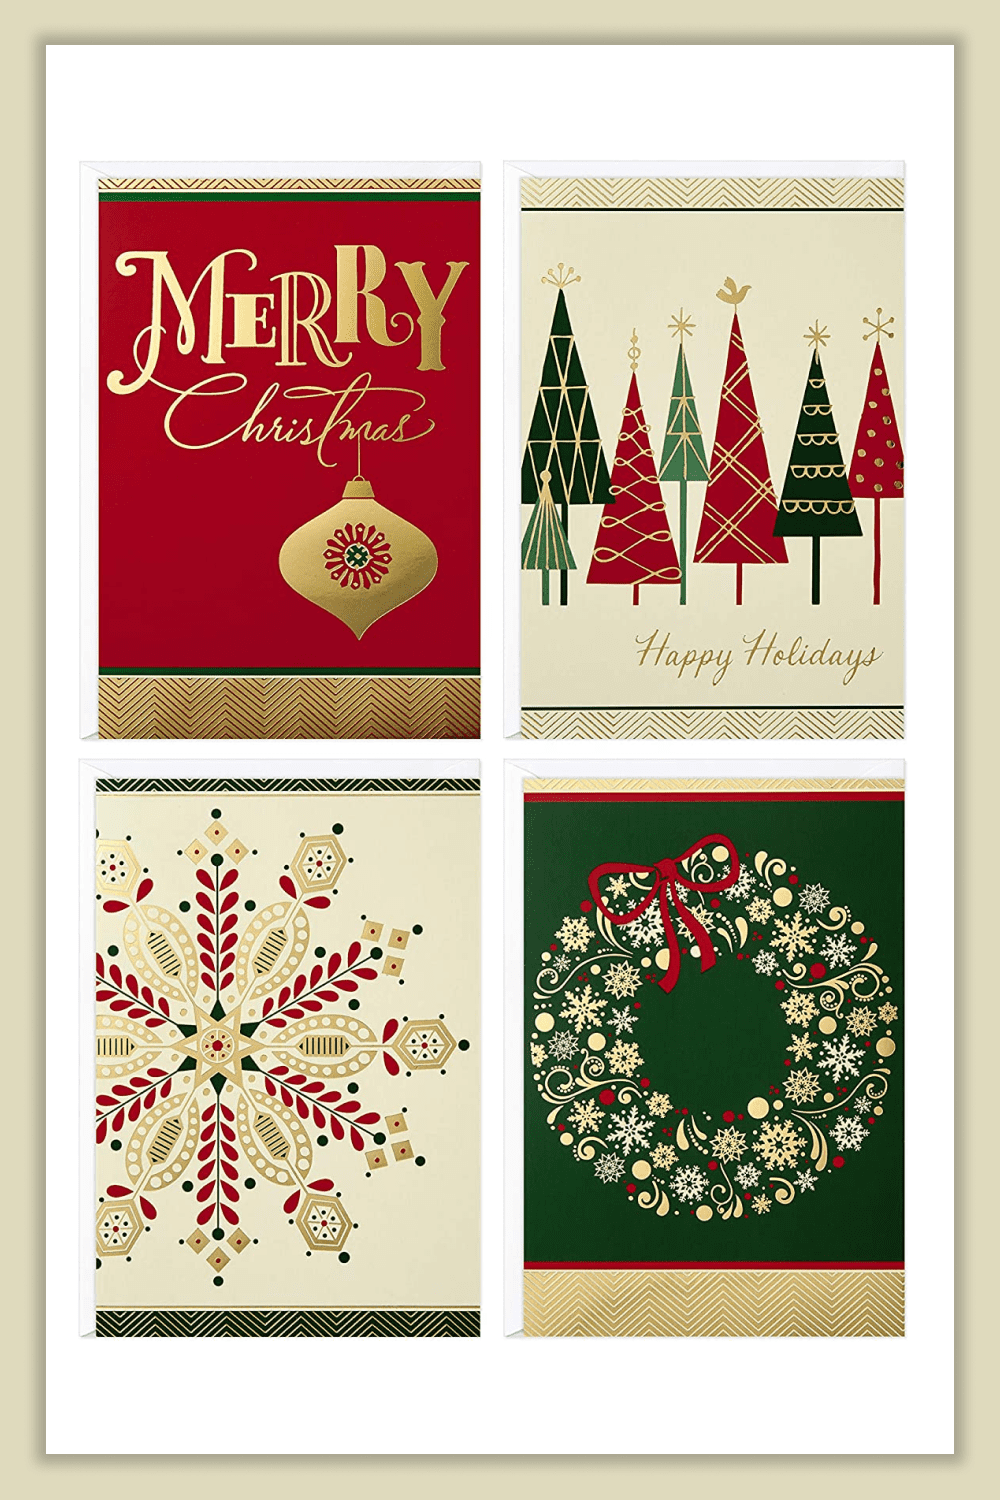 Collage of cards with Christmas trees, wishes, a wreath and snowflakes on a Christmas theme.